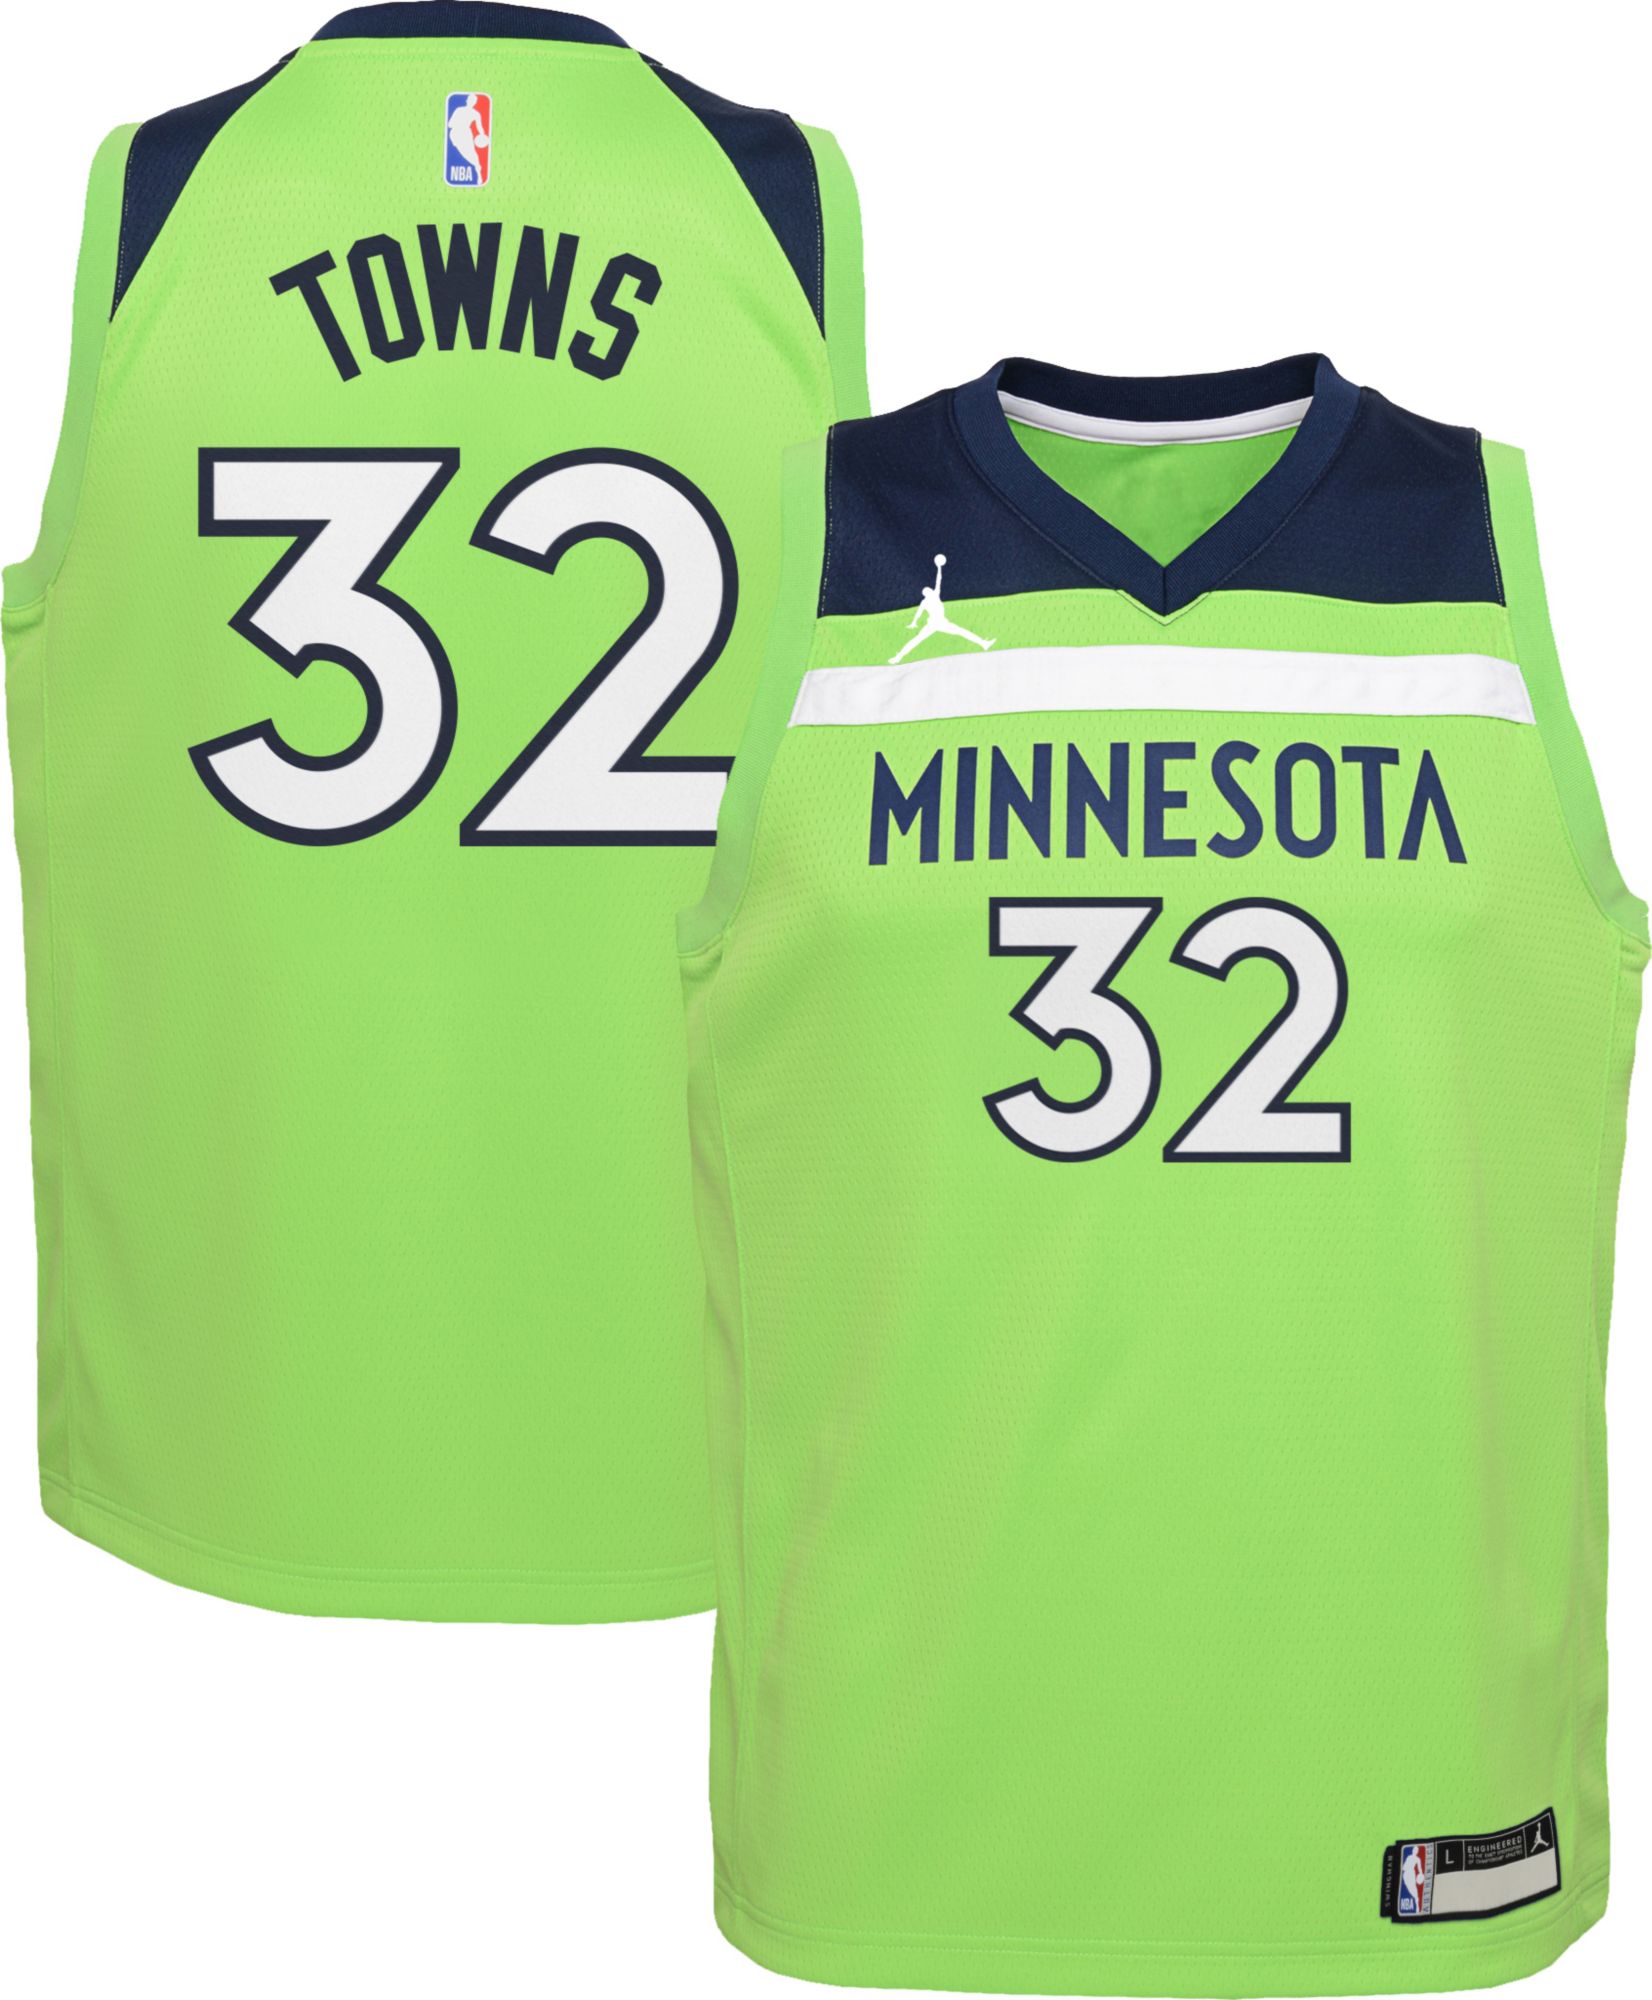 karl anthony towns throwback jersey